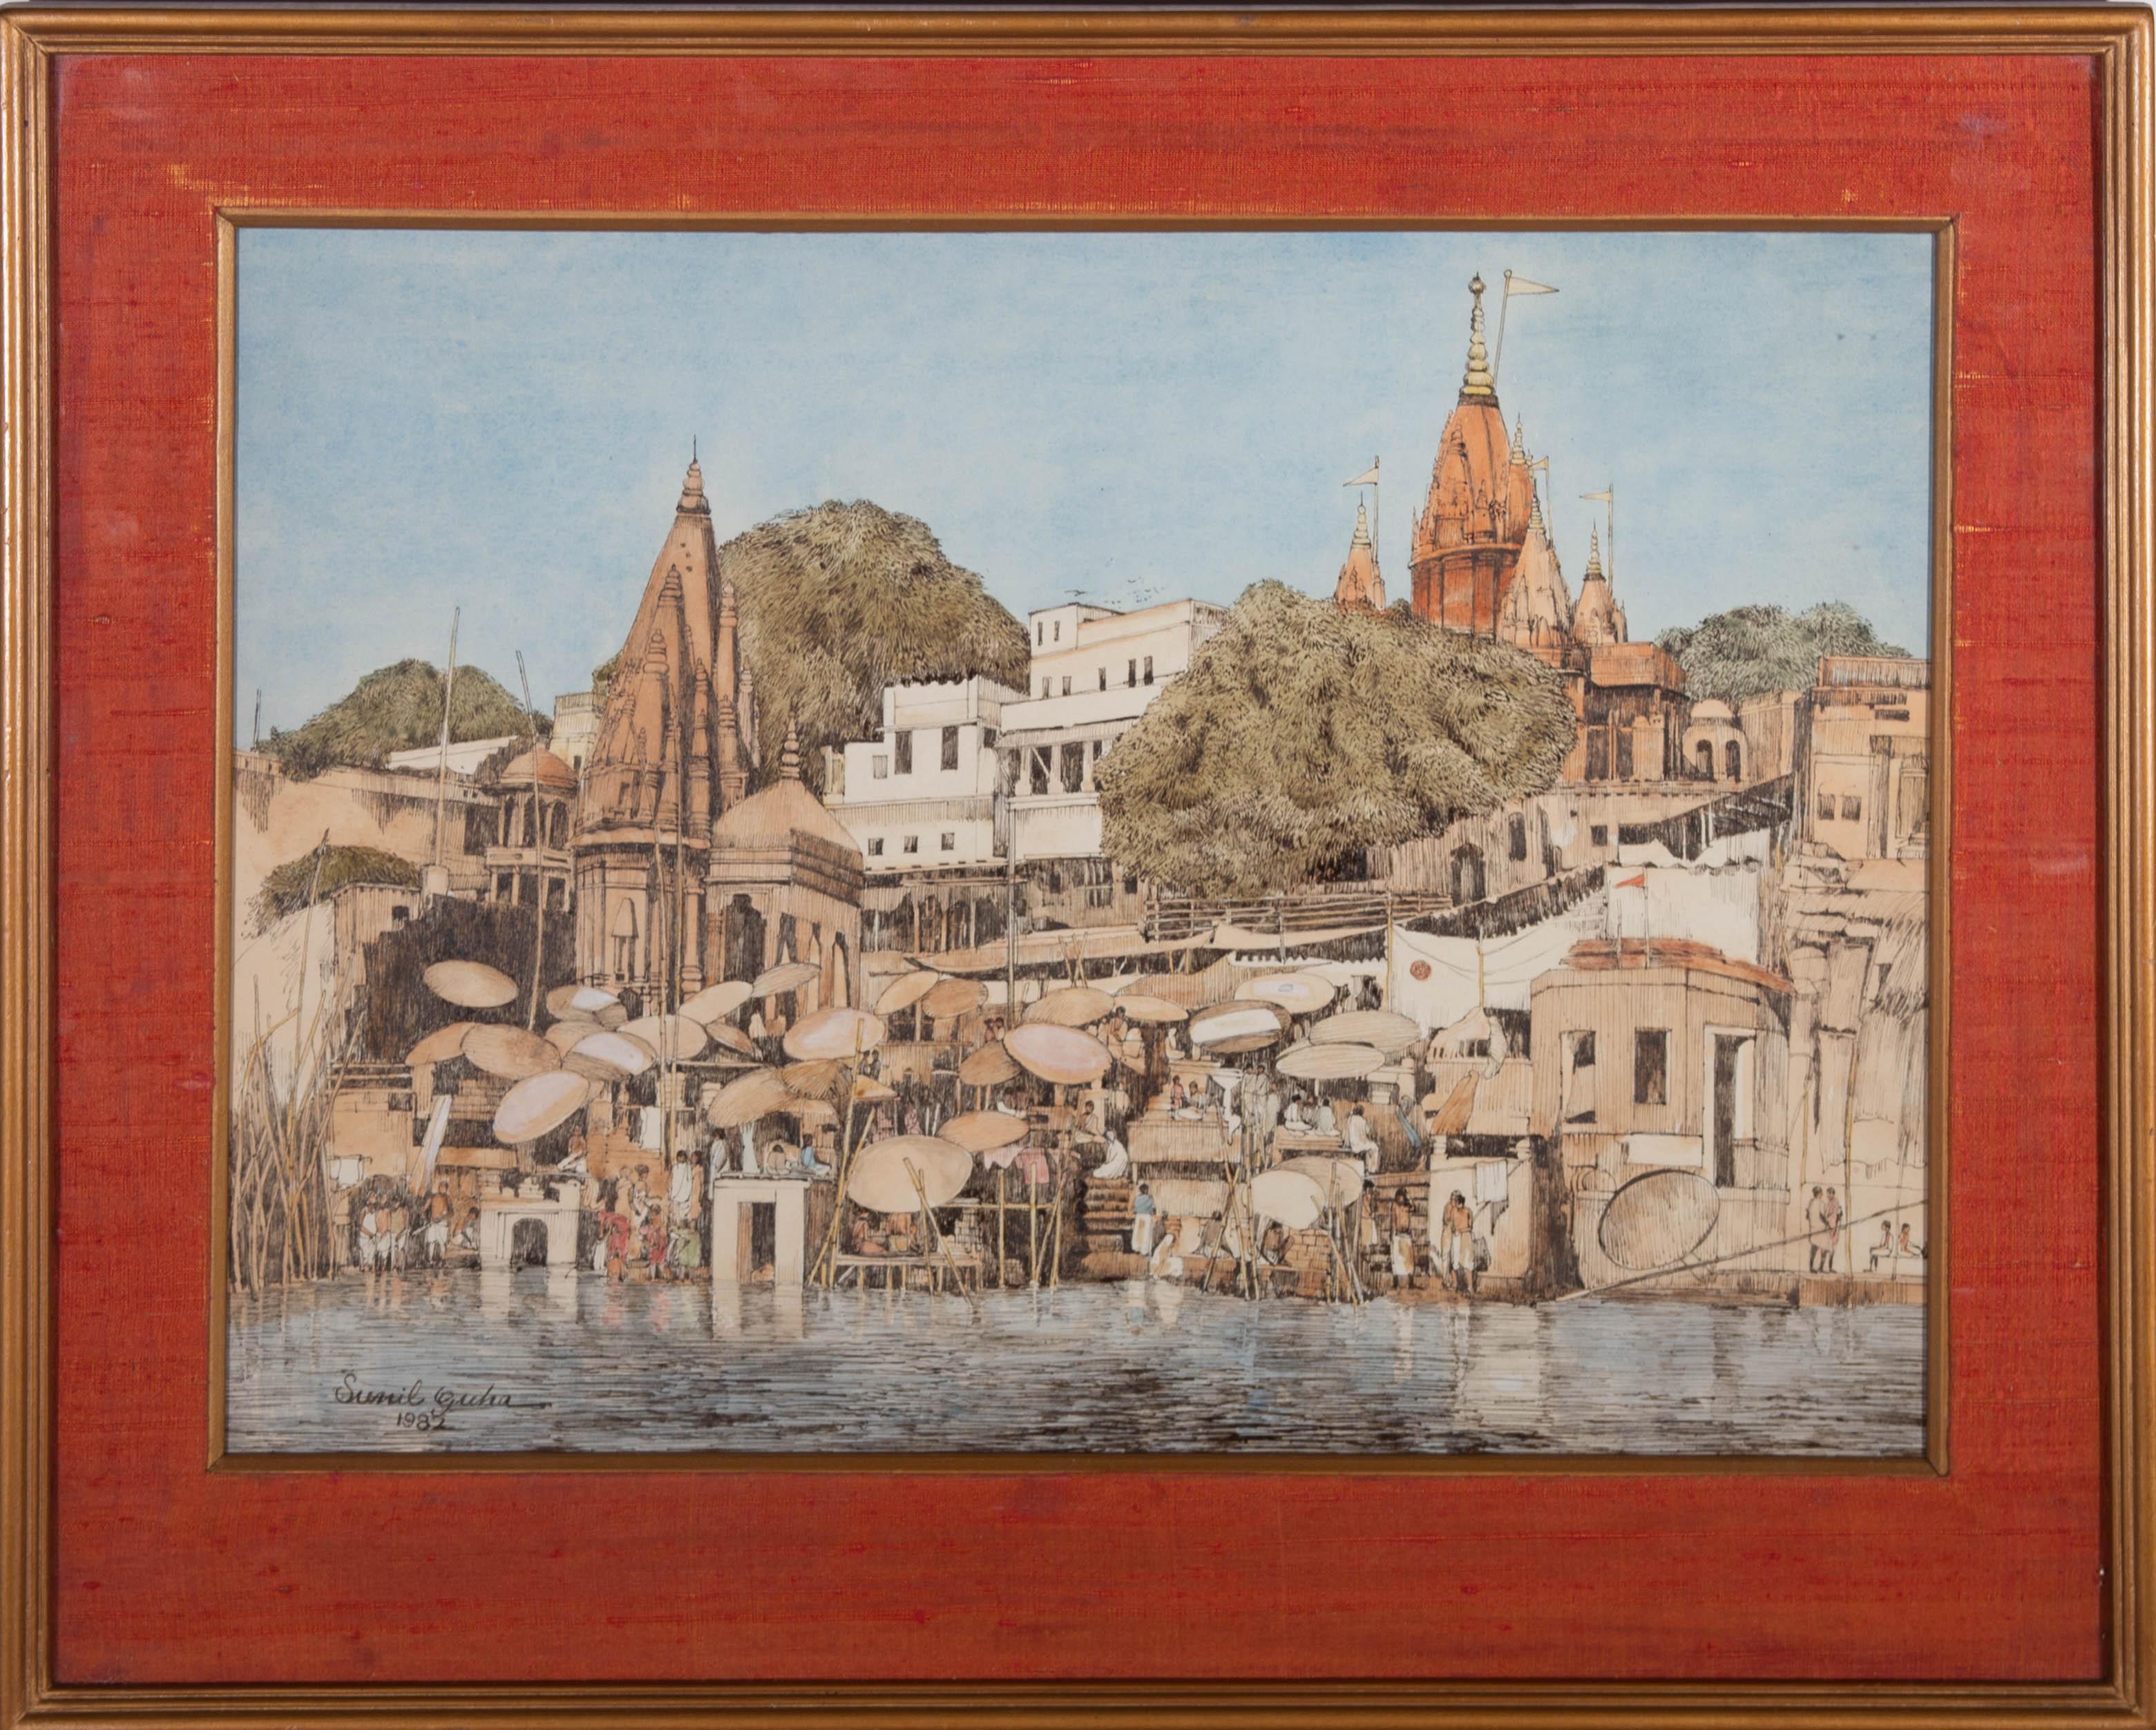 An intriguing watercolour scene of Dasahwamedh Ghat in Varansi. The artist has contrasted the blue sky and water with the pastel orange of the architectural structures which is complimented by the orange linen slip and gold frame. The artist has